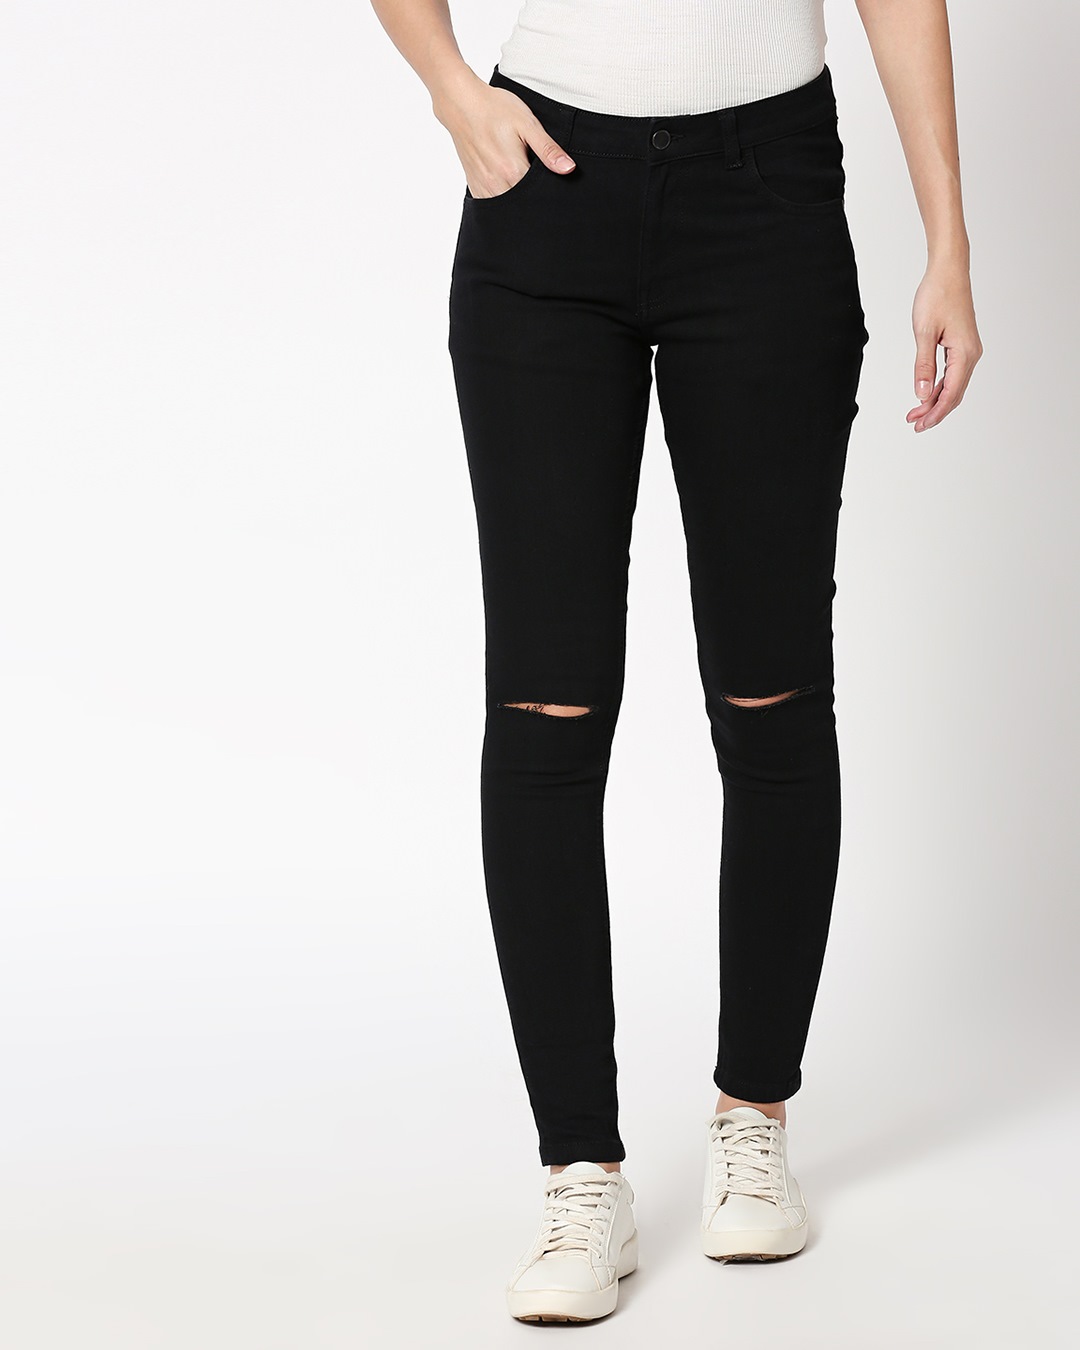 Shop Jade Black Distressed Mid Rise Stretchable Women's Jeans-Back